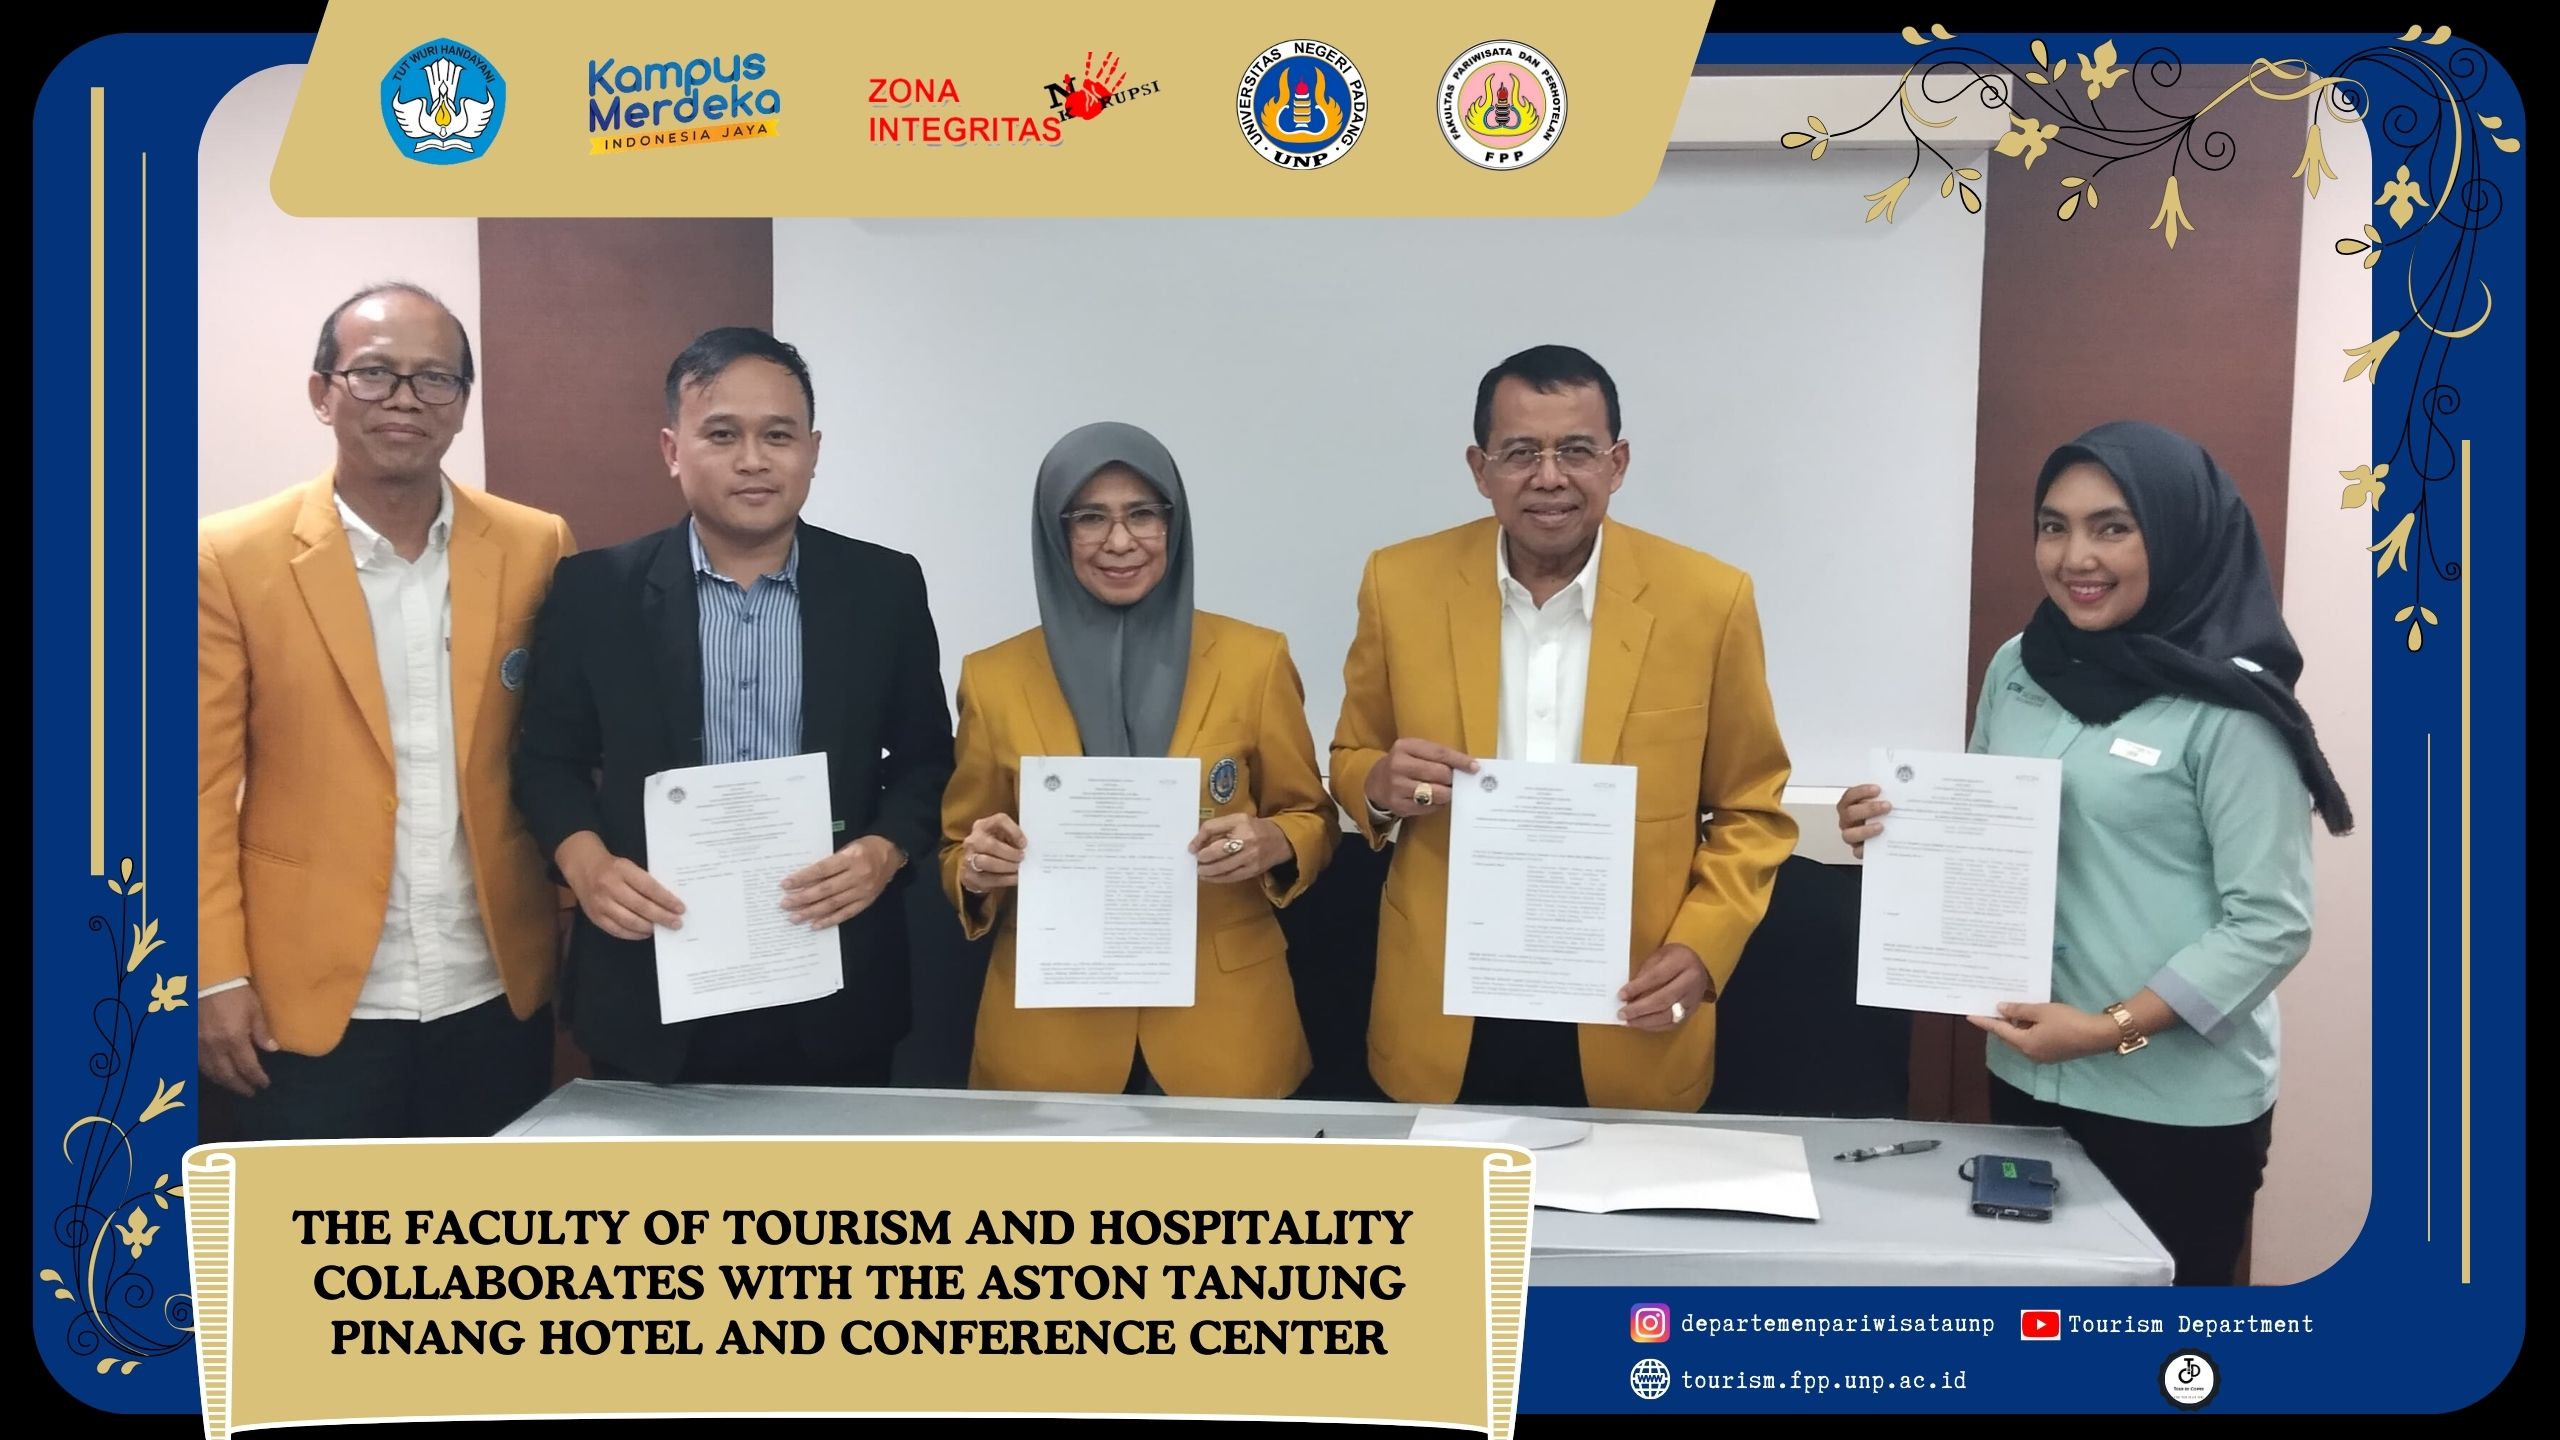 The Faculty of Tourism and Hospitality collaborates with the Aston Tanjung Pinang Hotel and Conference Center